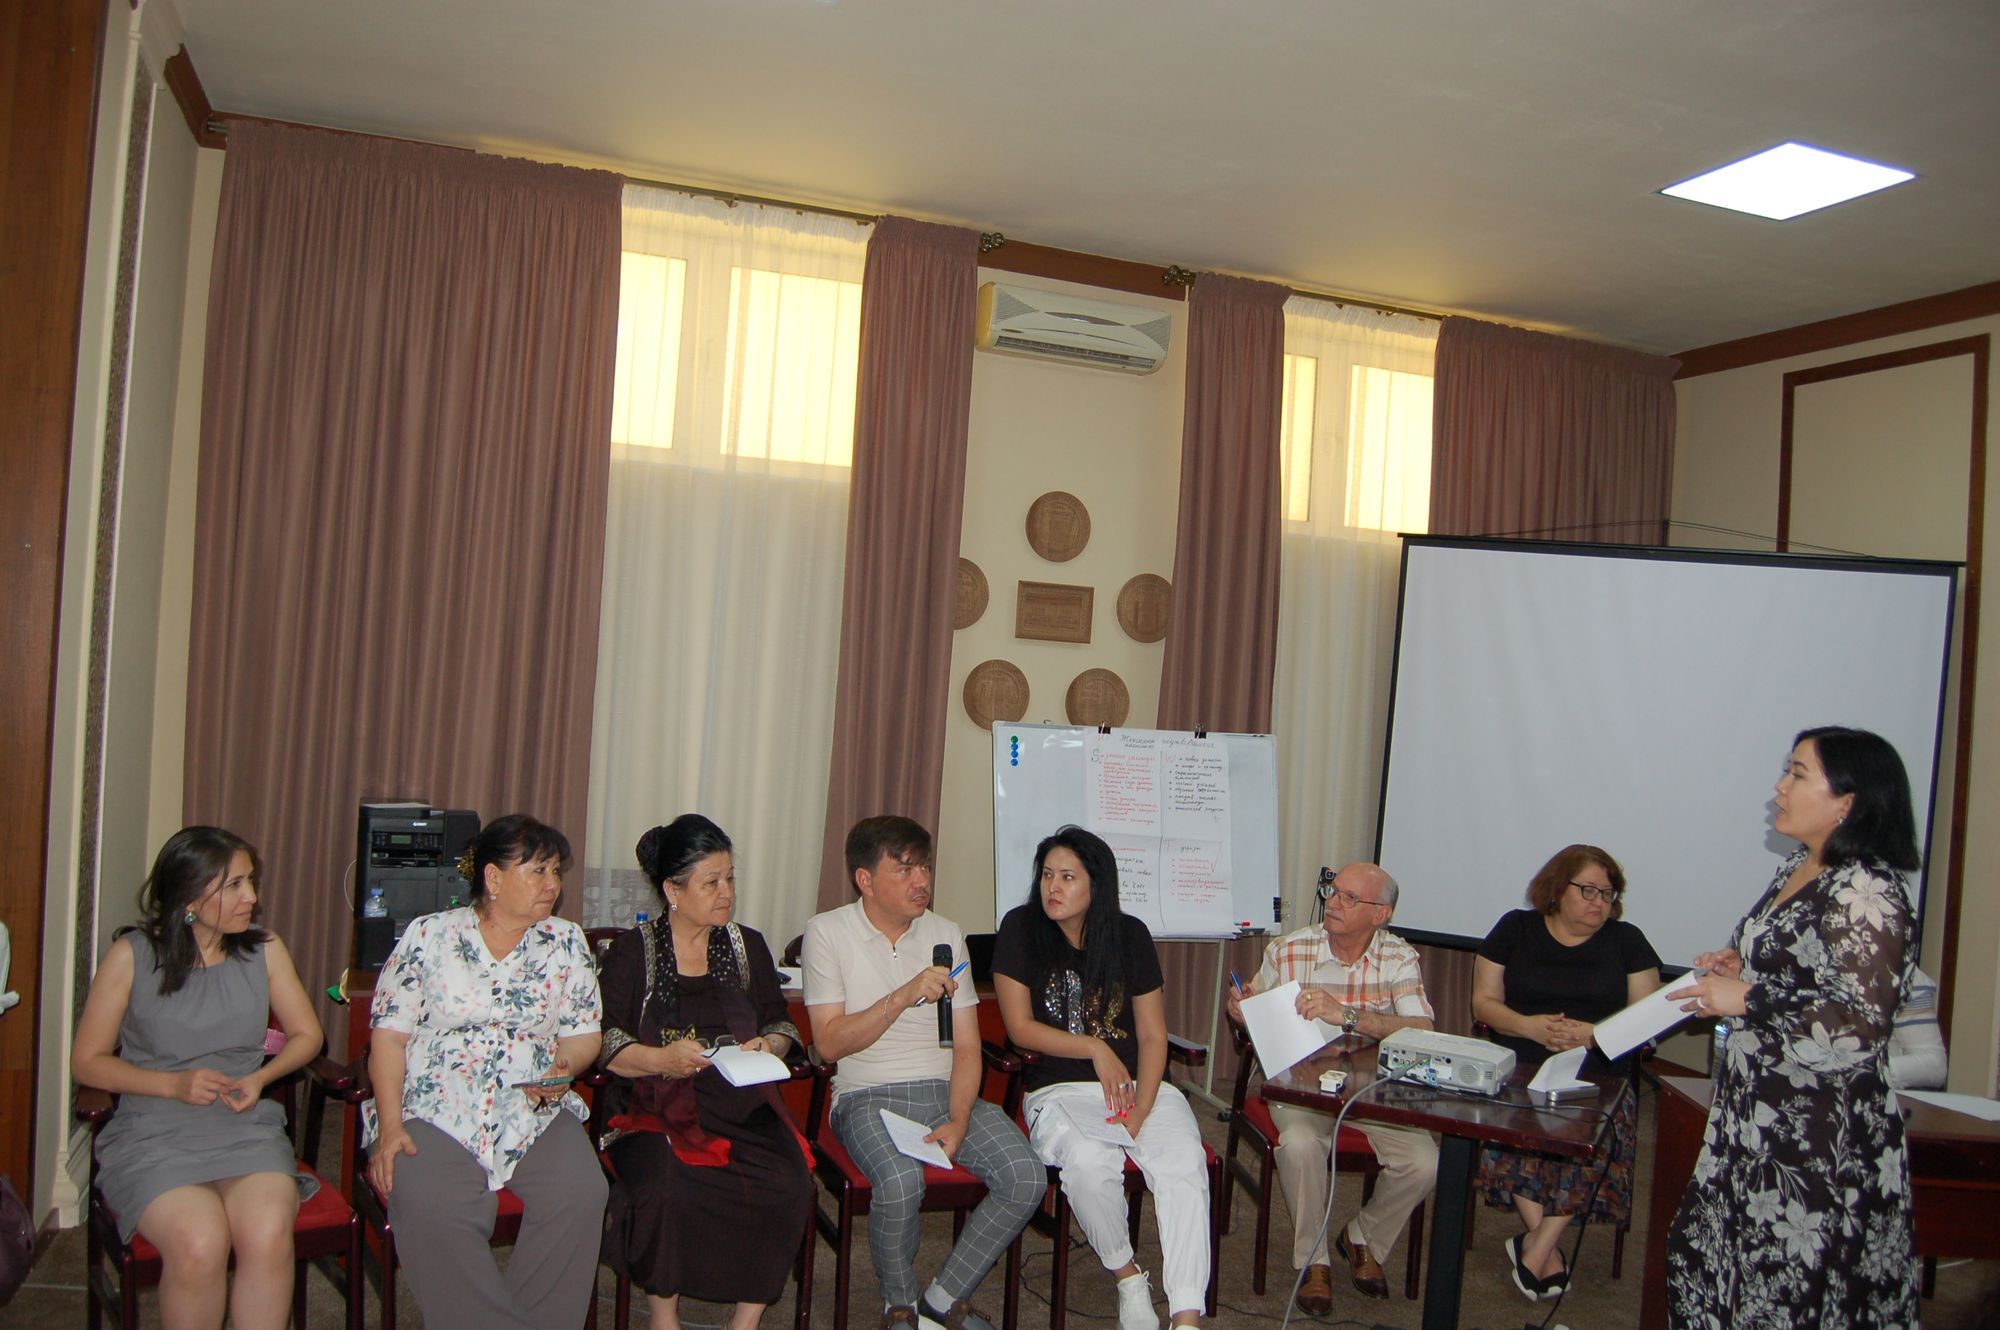 Protecting the rights of vulnerable groups in Uzbekistan